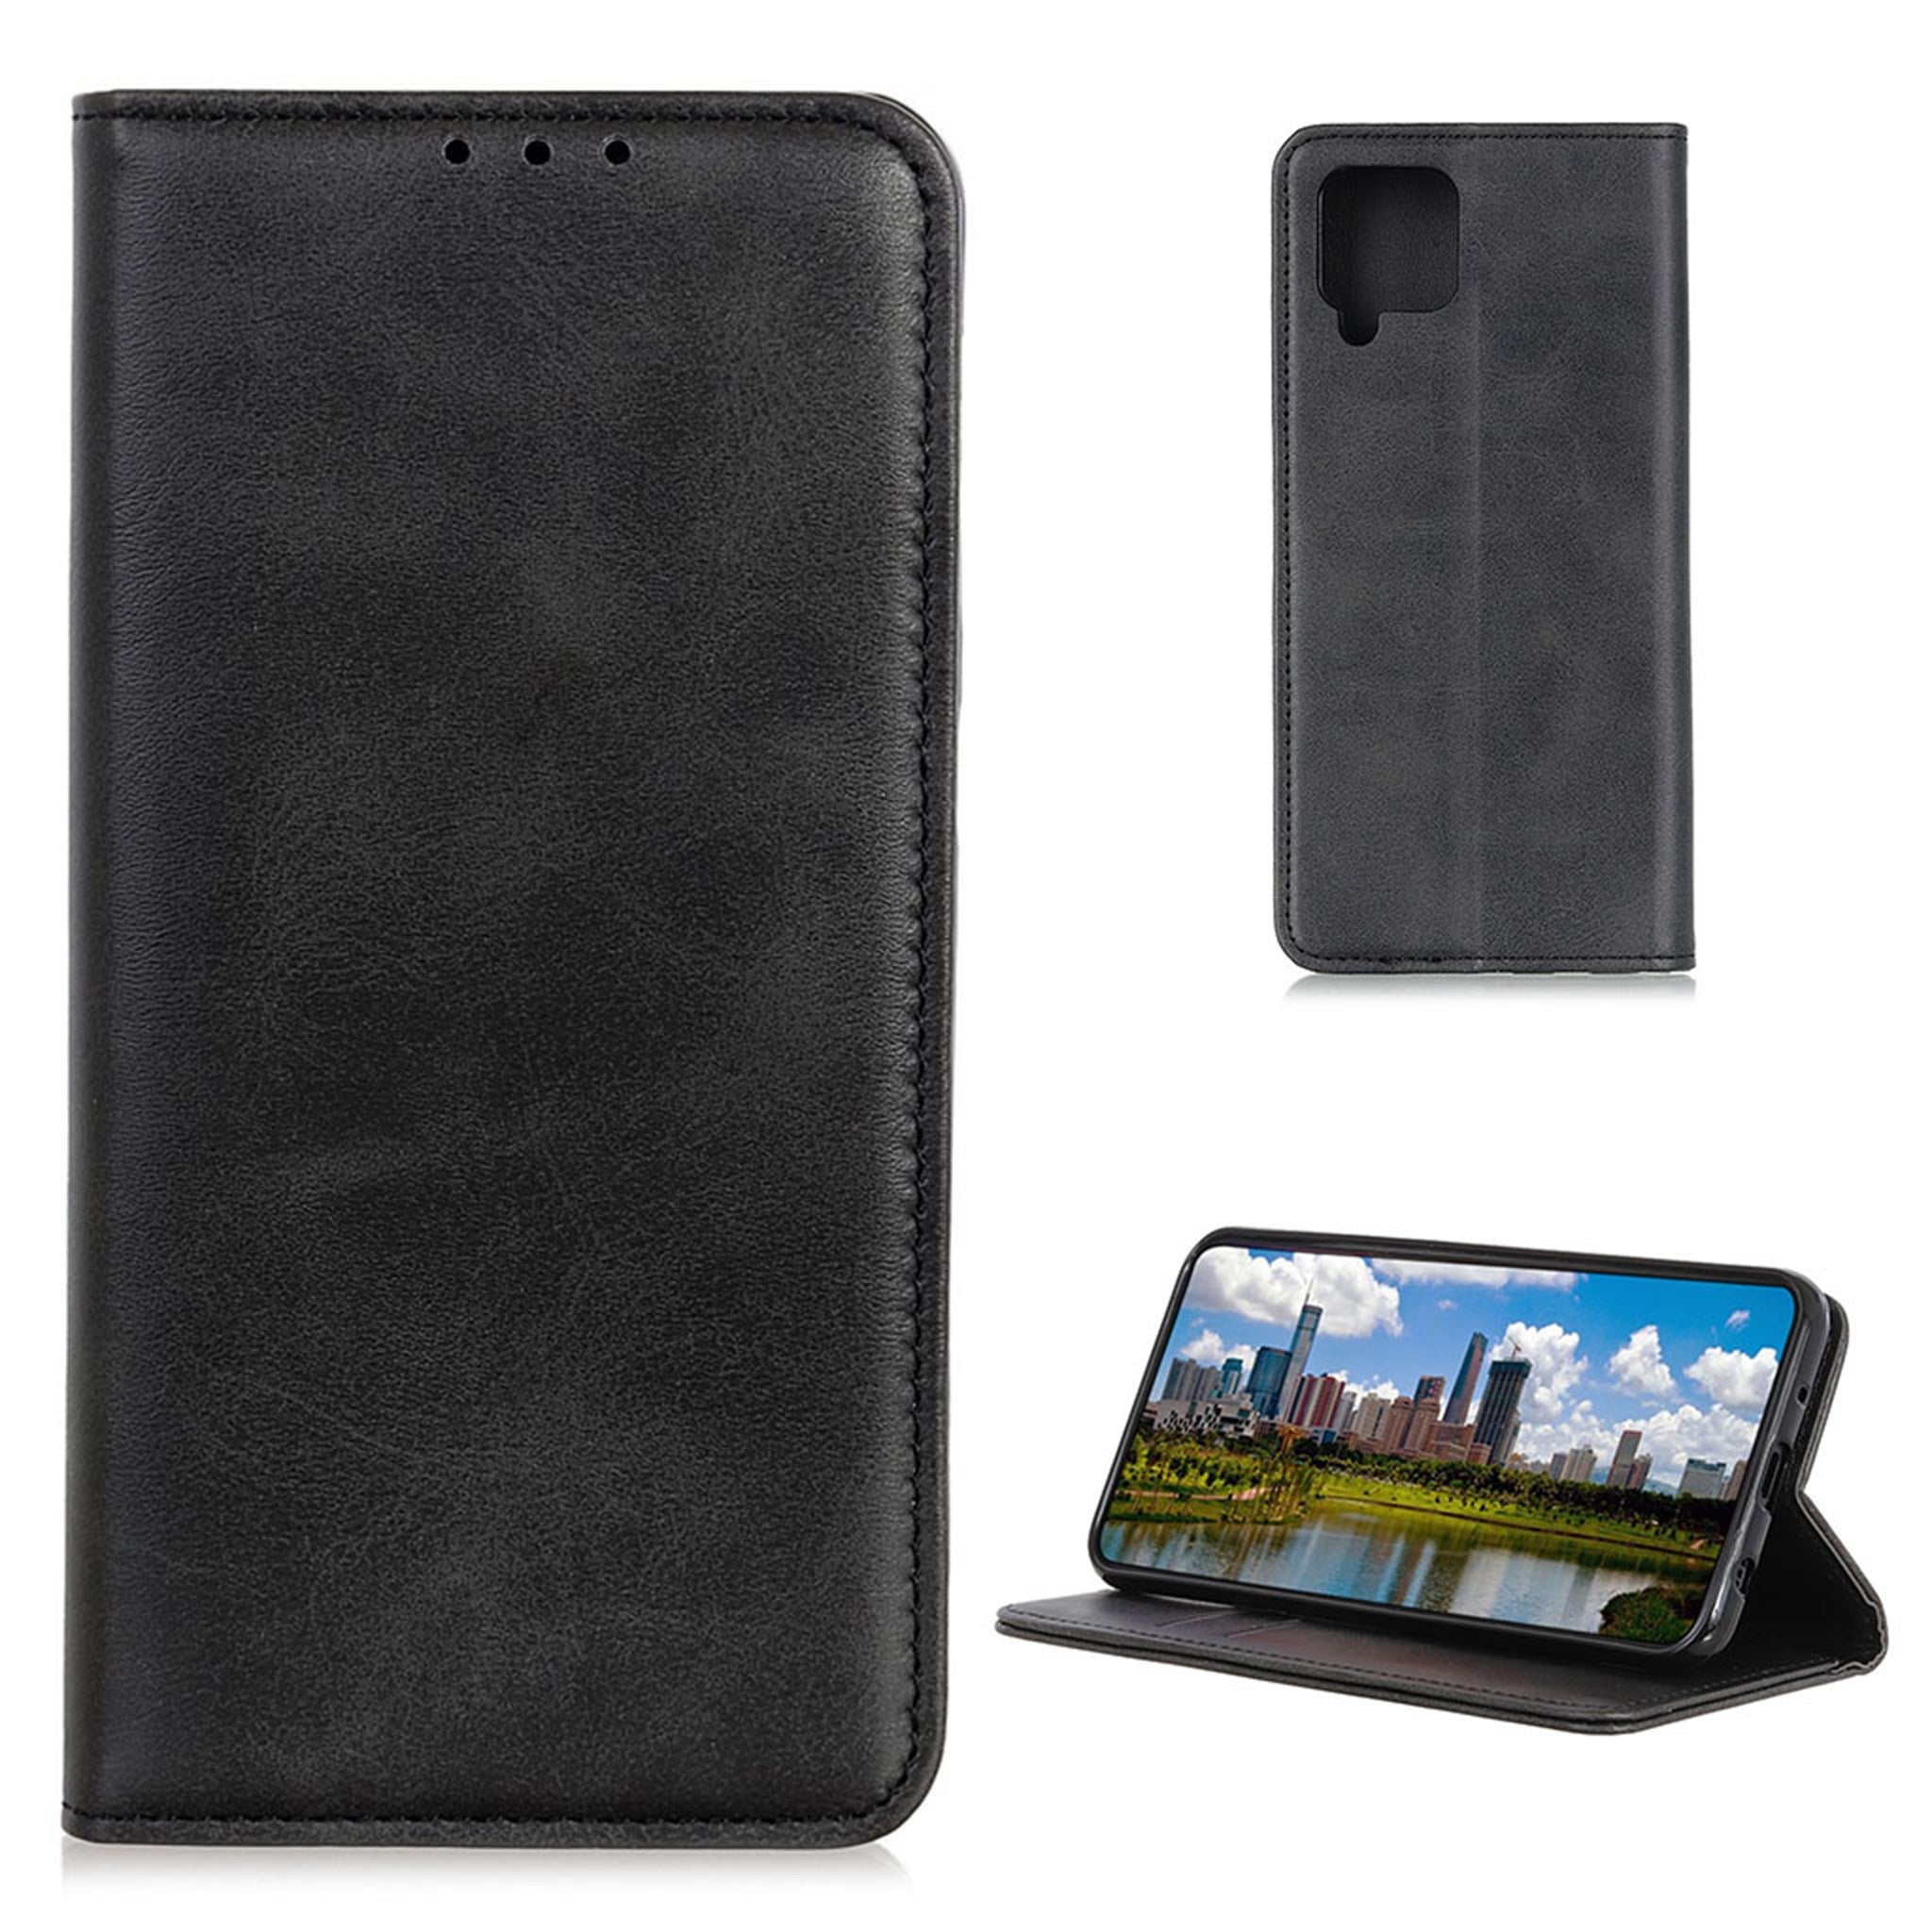 Wallet-style genuine leather flipcase for Samsung Galaxy A42 5G - Black